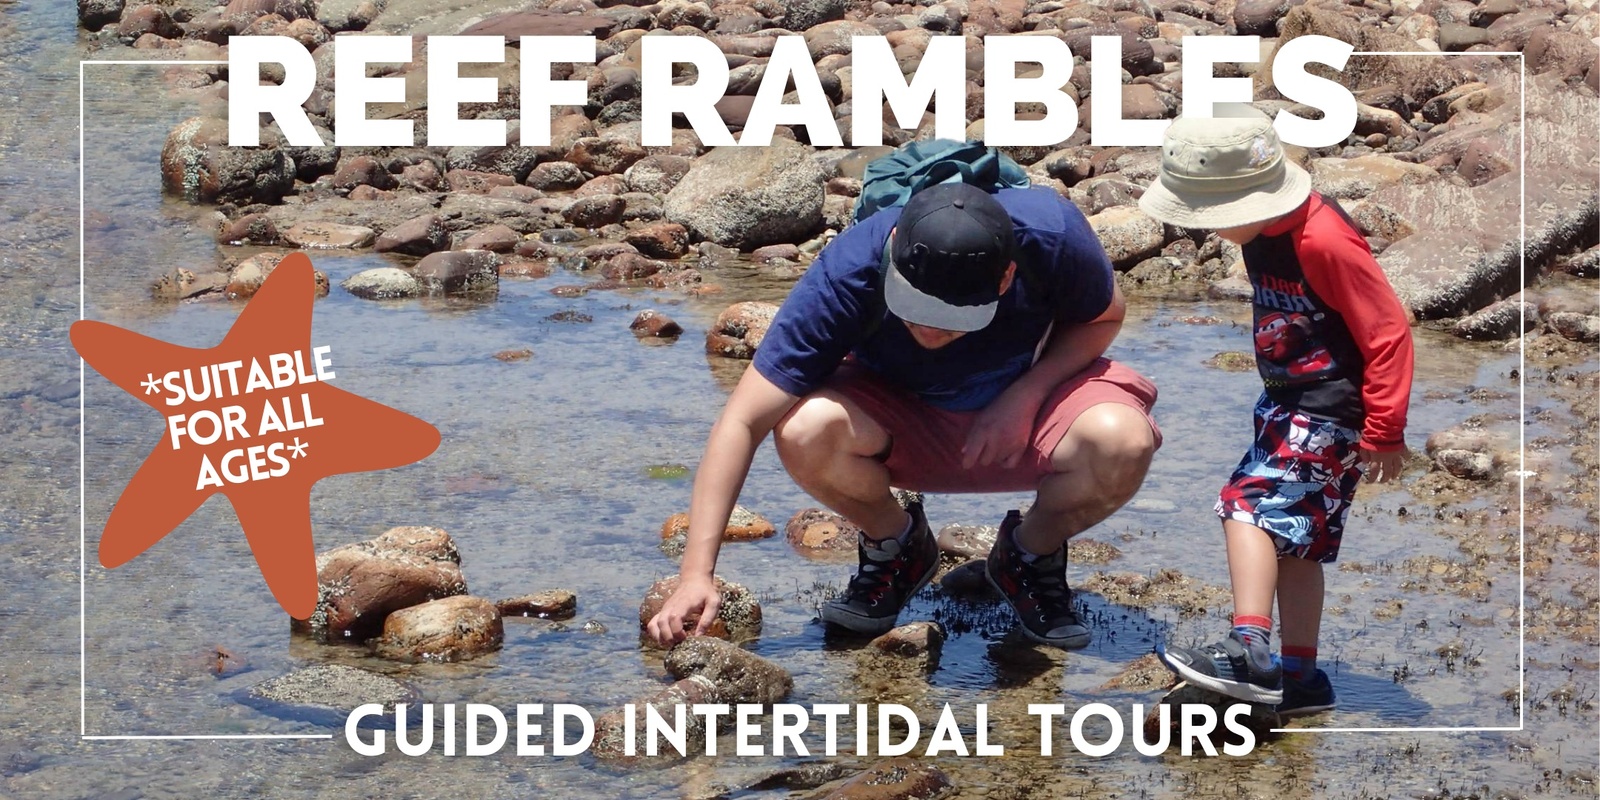 Banner image for REEF RAMBLES: all ages! Hallet Cove, December 27